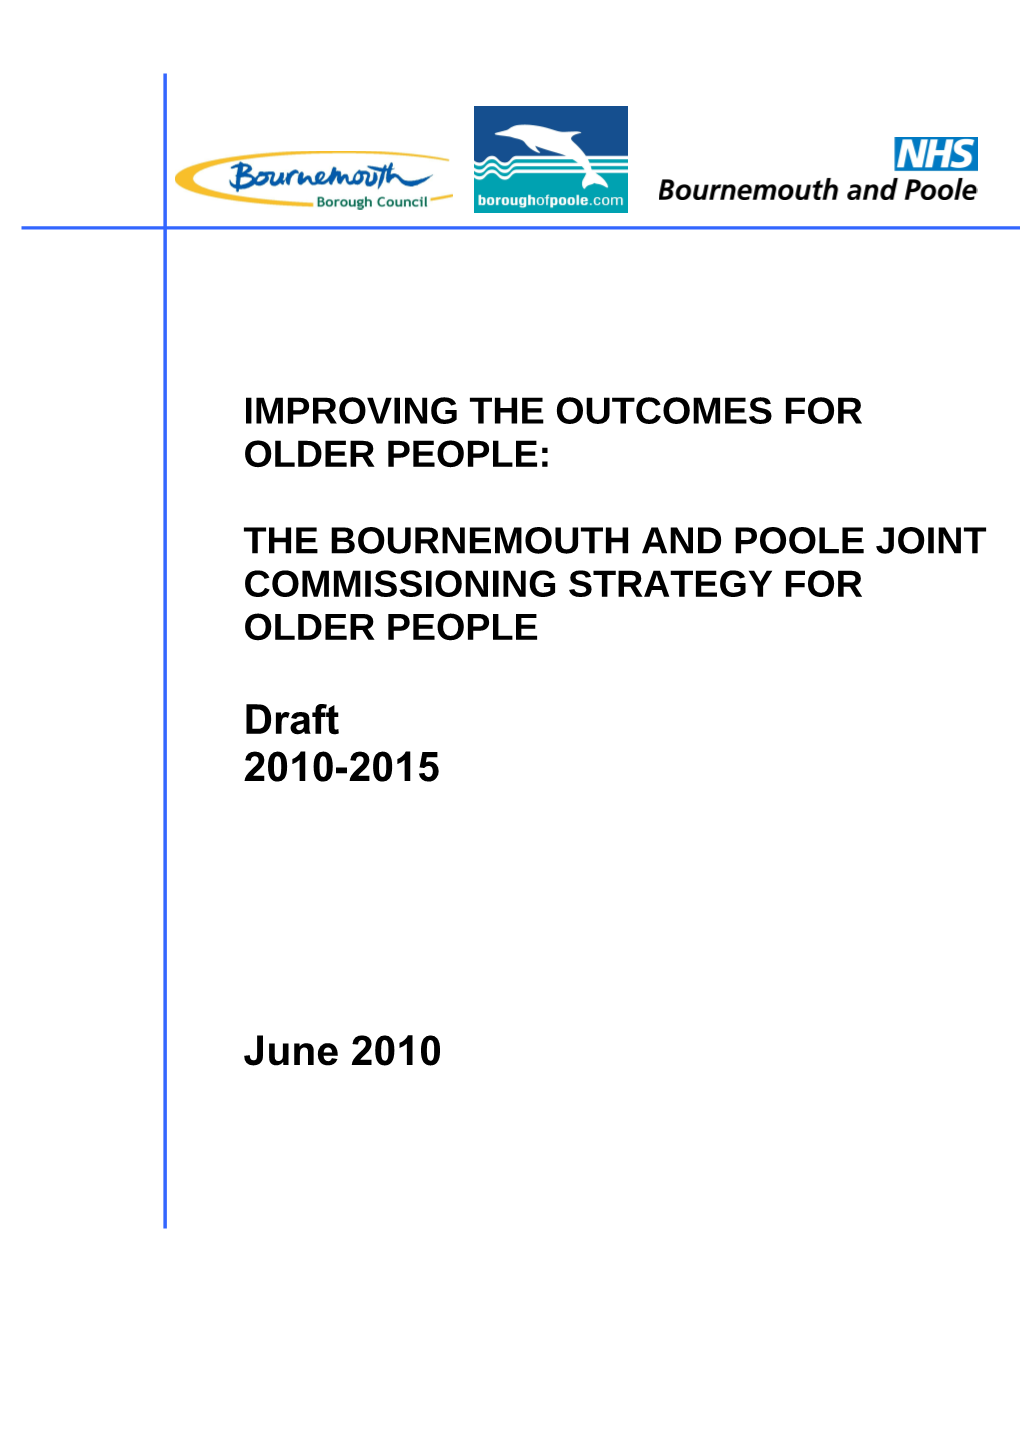 The Bournemouth and Poole Joint Commissioning Strategy for Older People - Appendix